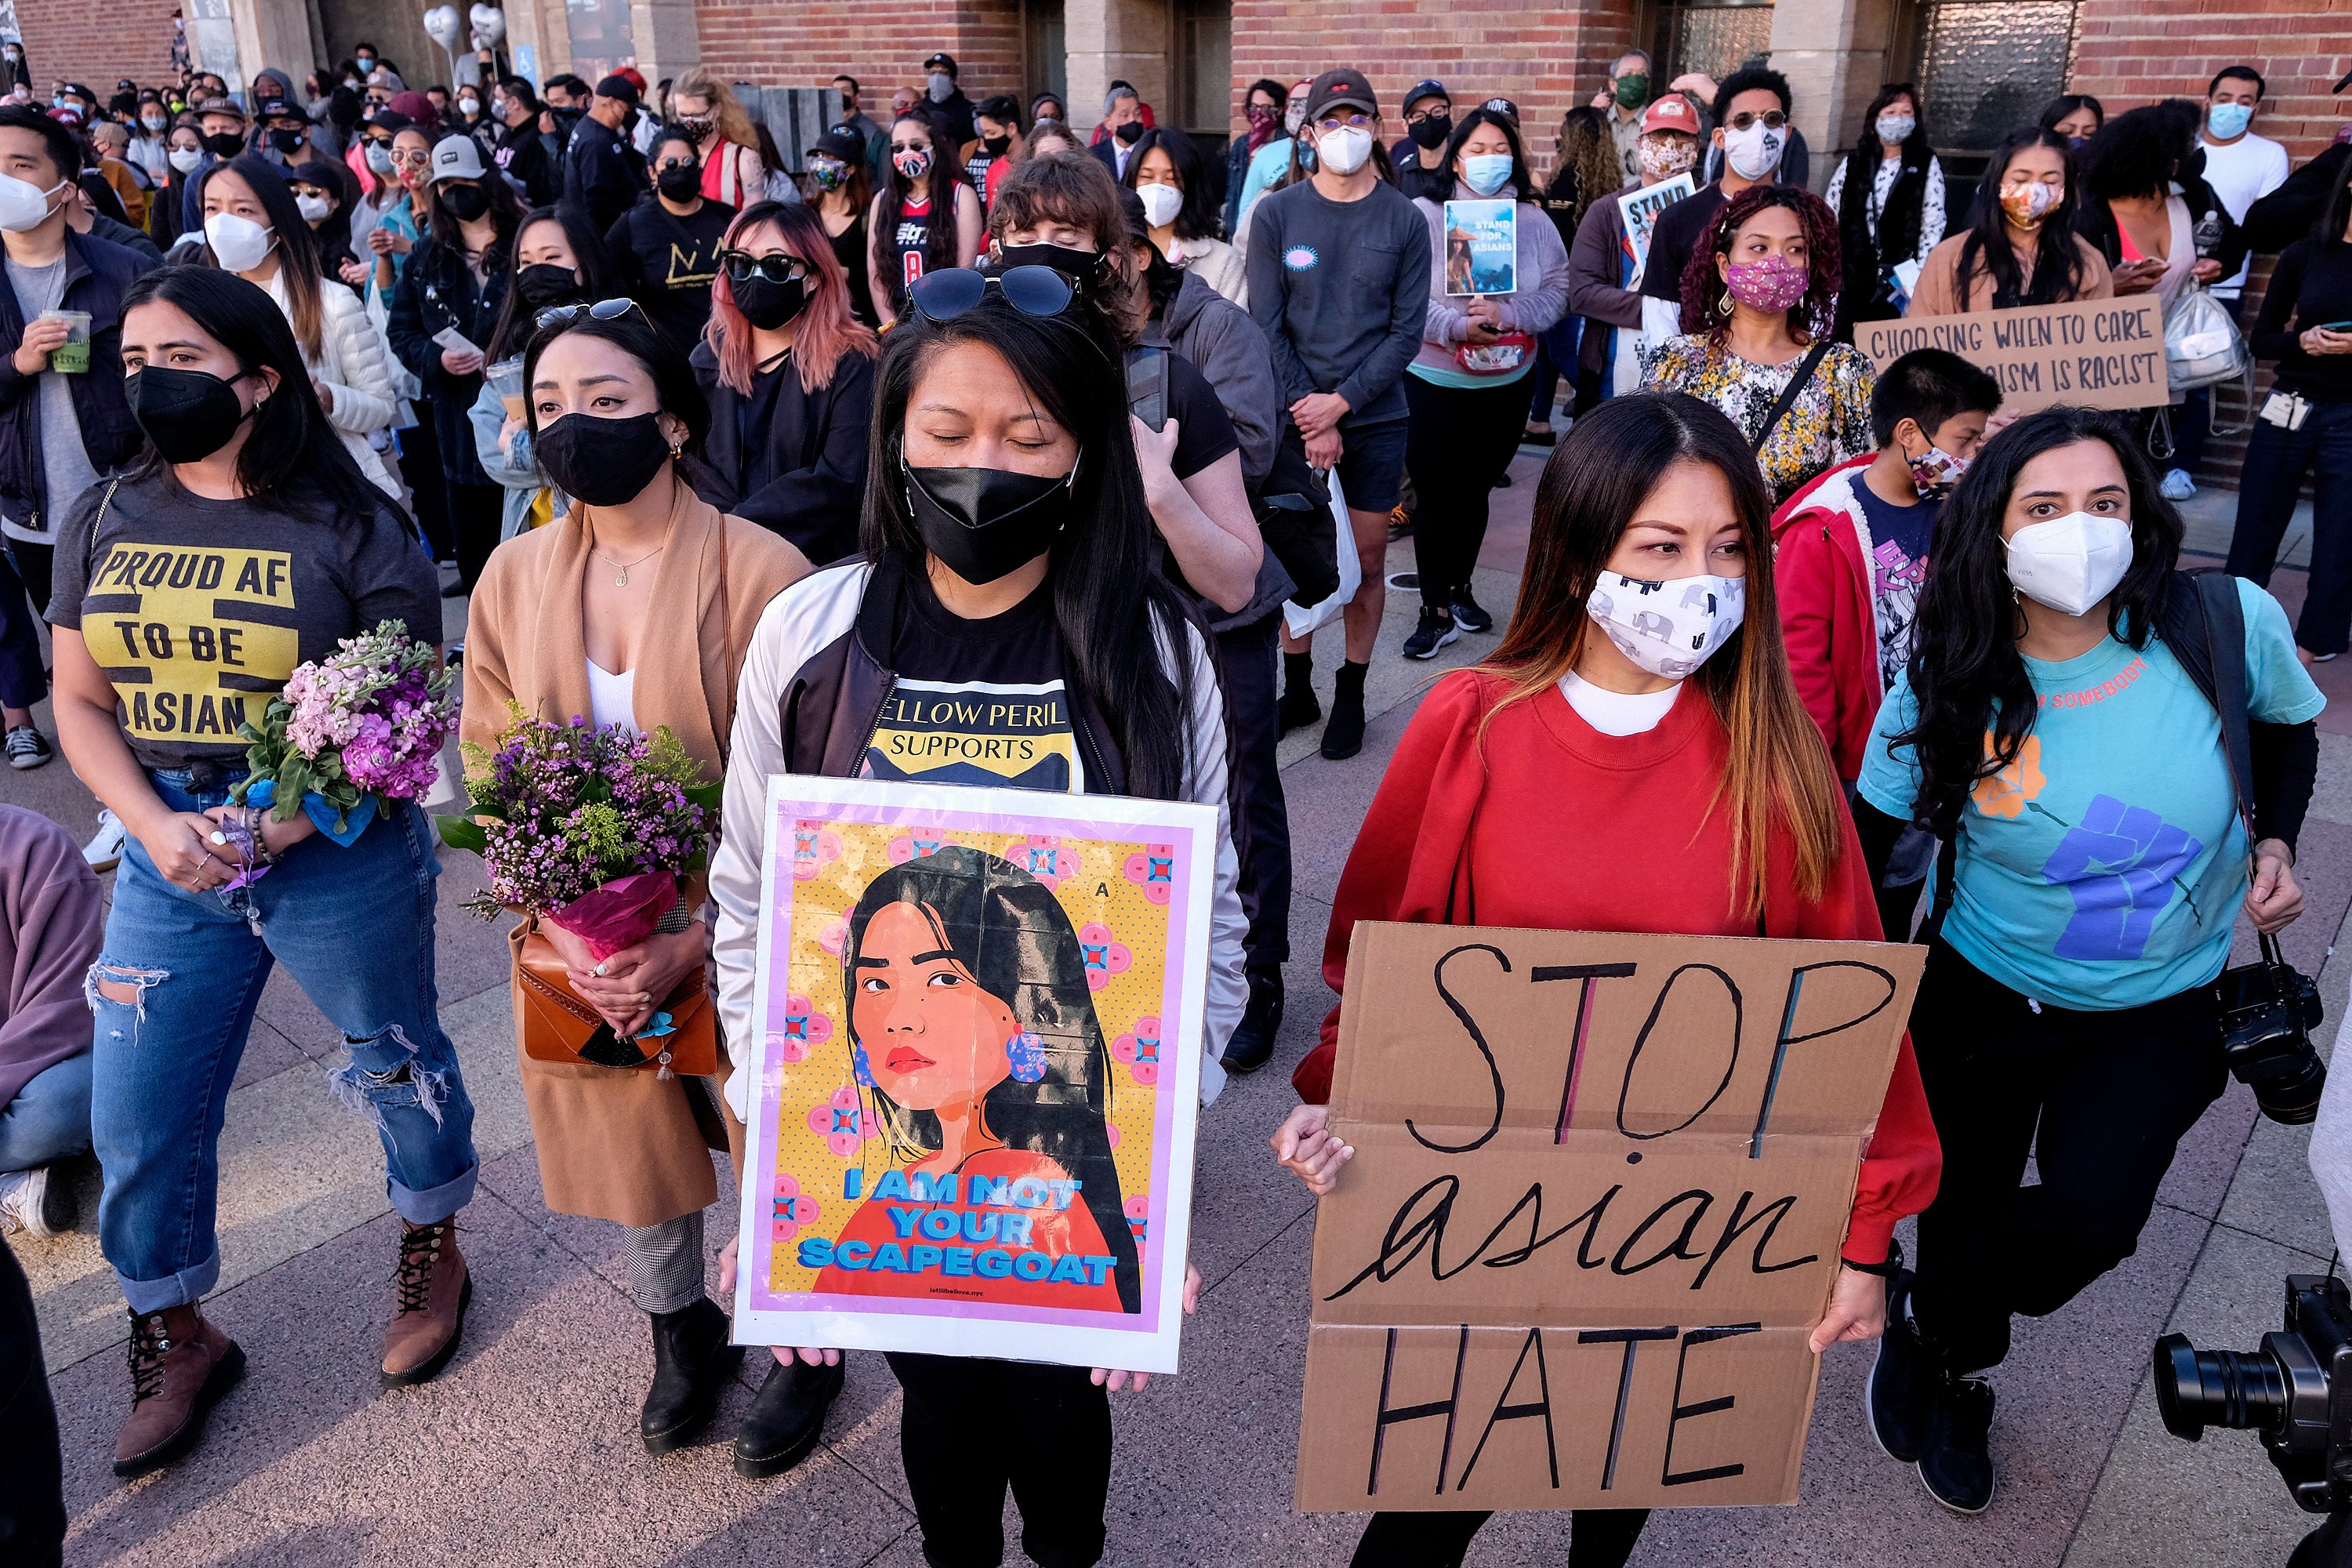 Protesters participate in a rally to raise awareness of anti-Asian violence, at the Japanese American National Museum in Little Tokyo in Los Angeles. Photo: AFP